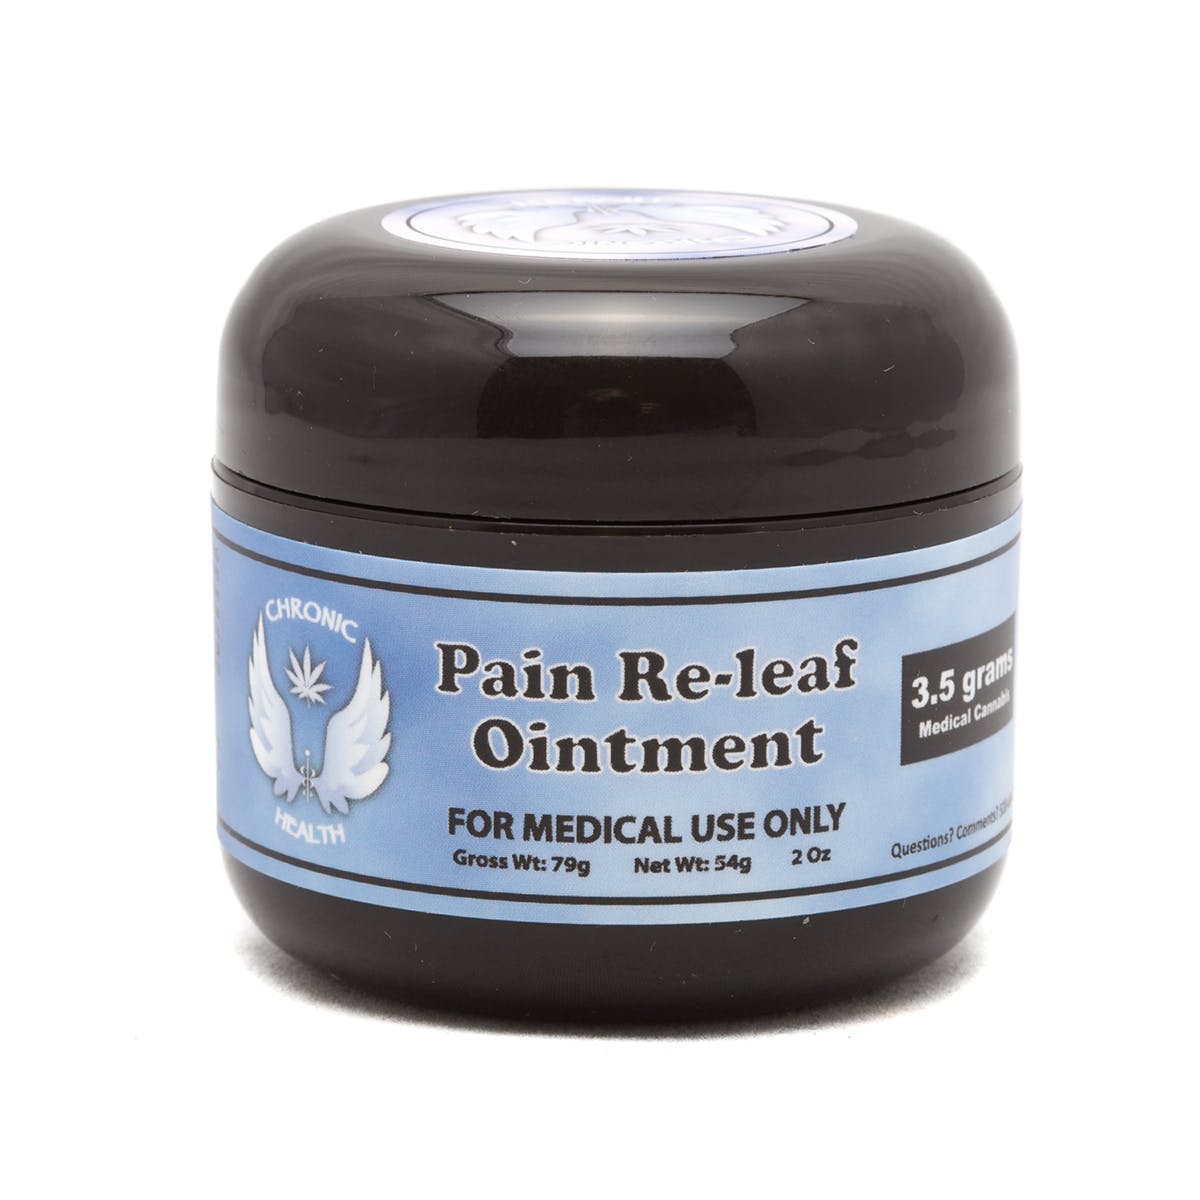 Pain Re-Leaf Ointment 350mg